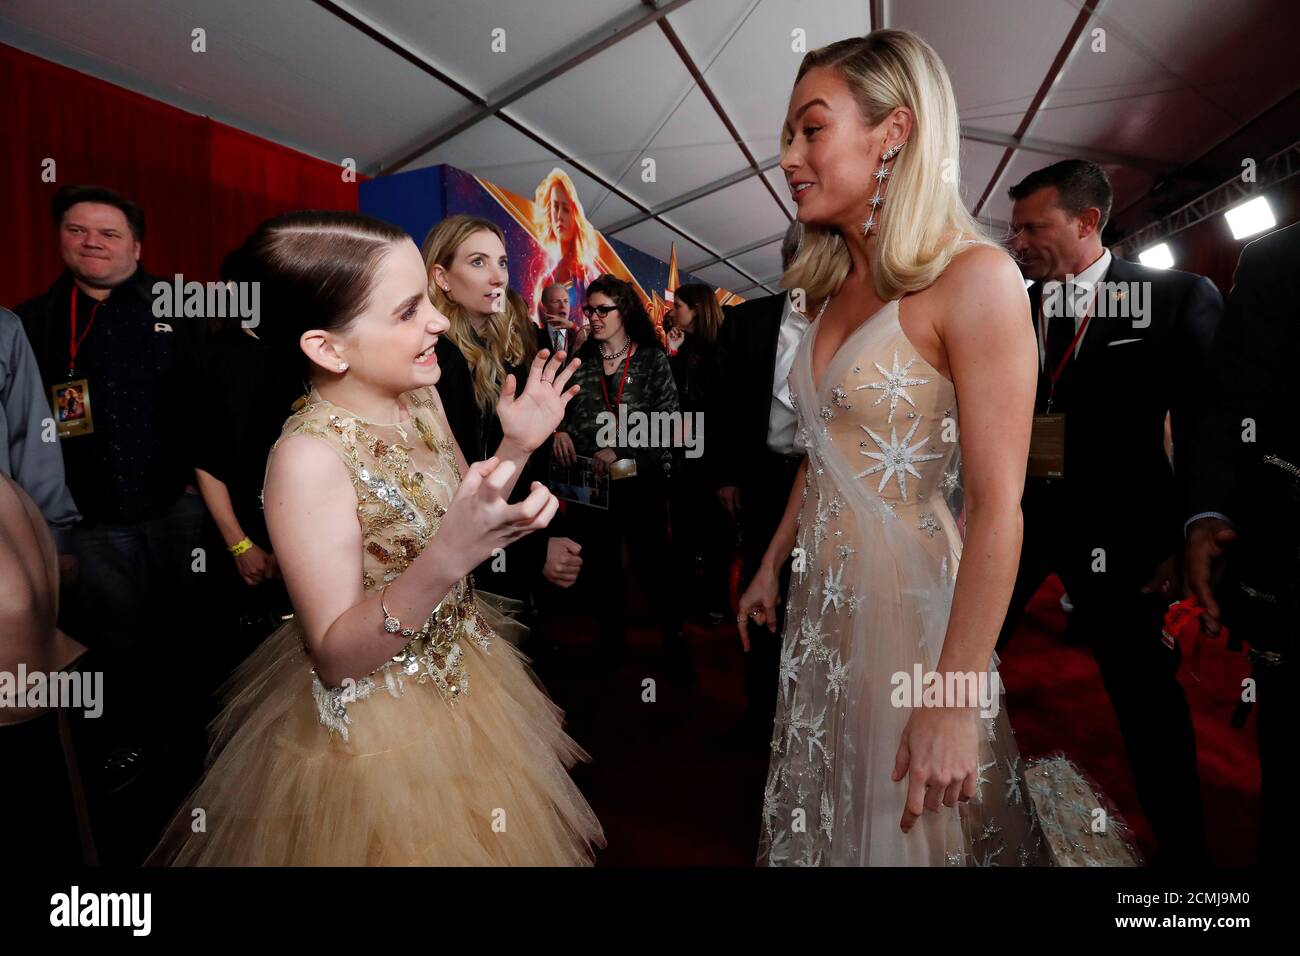 Cast members Brie Larson and Mckenna Grace speak at the premiere for the  movie "Captain Marvel" in Los Angeles, California, U.S., March 4, 2019.  REUTERS/Mario Anzuoni Stock Photo - Alamy